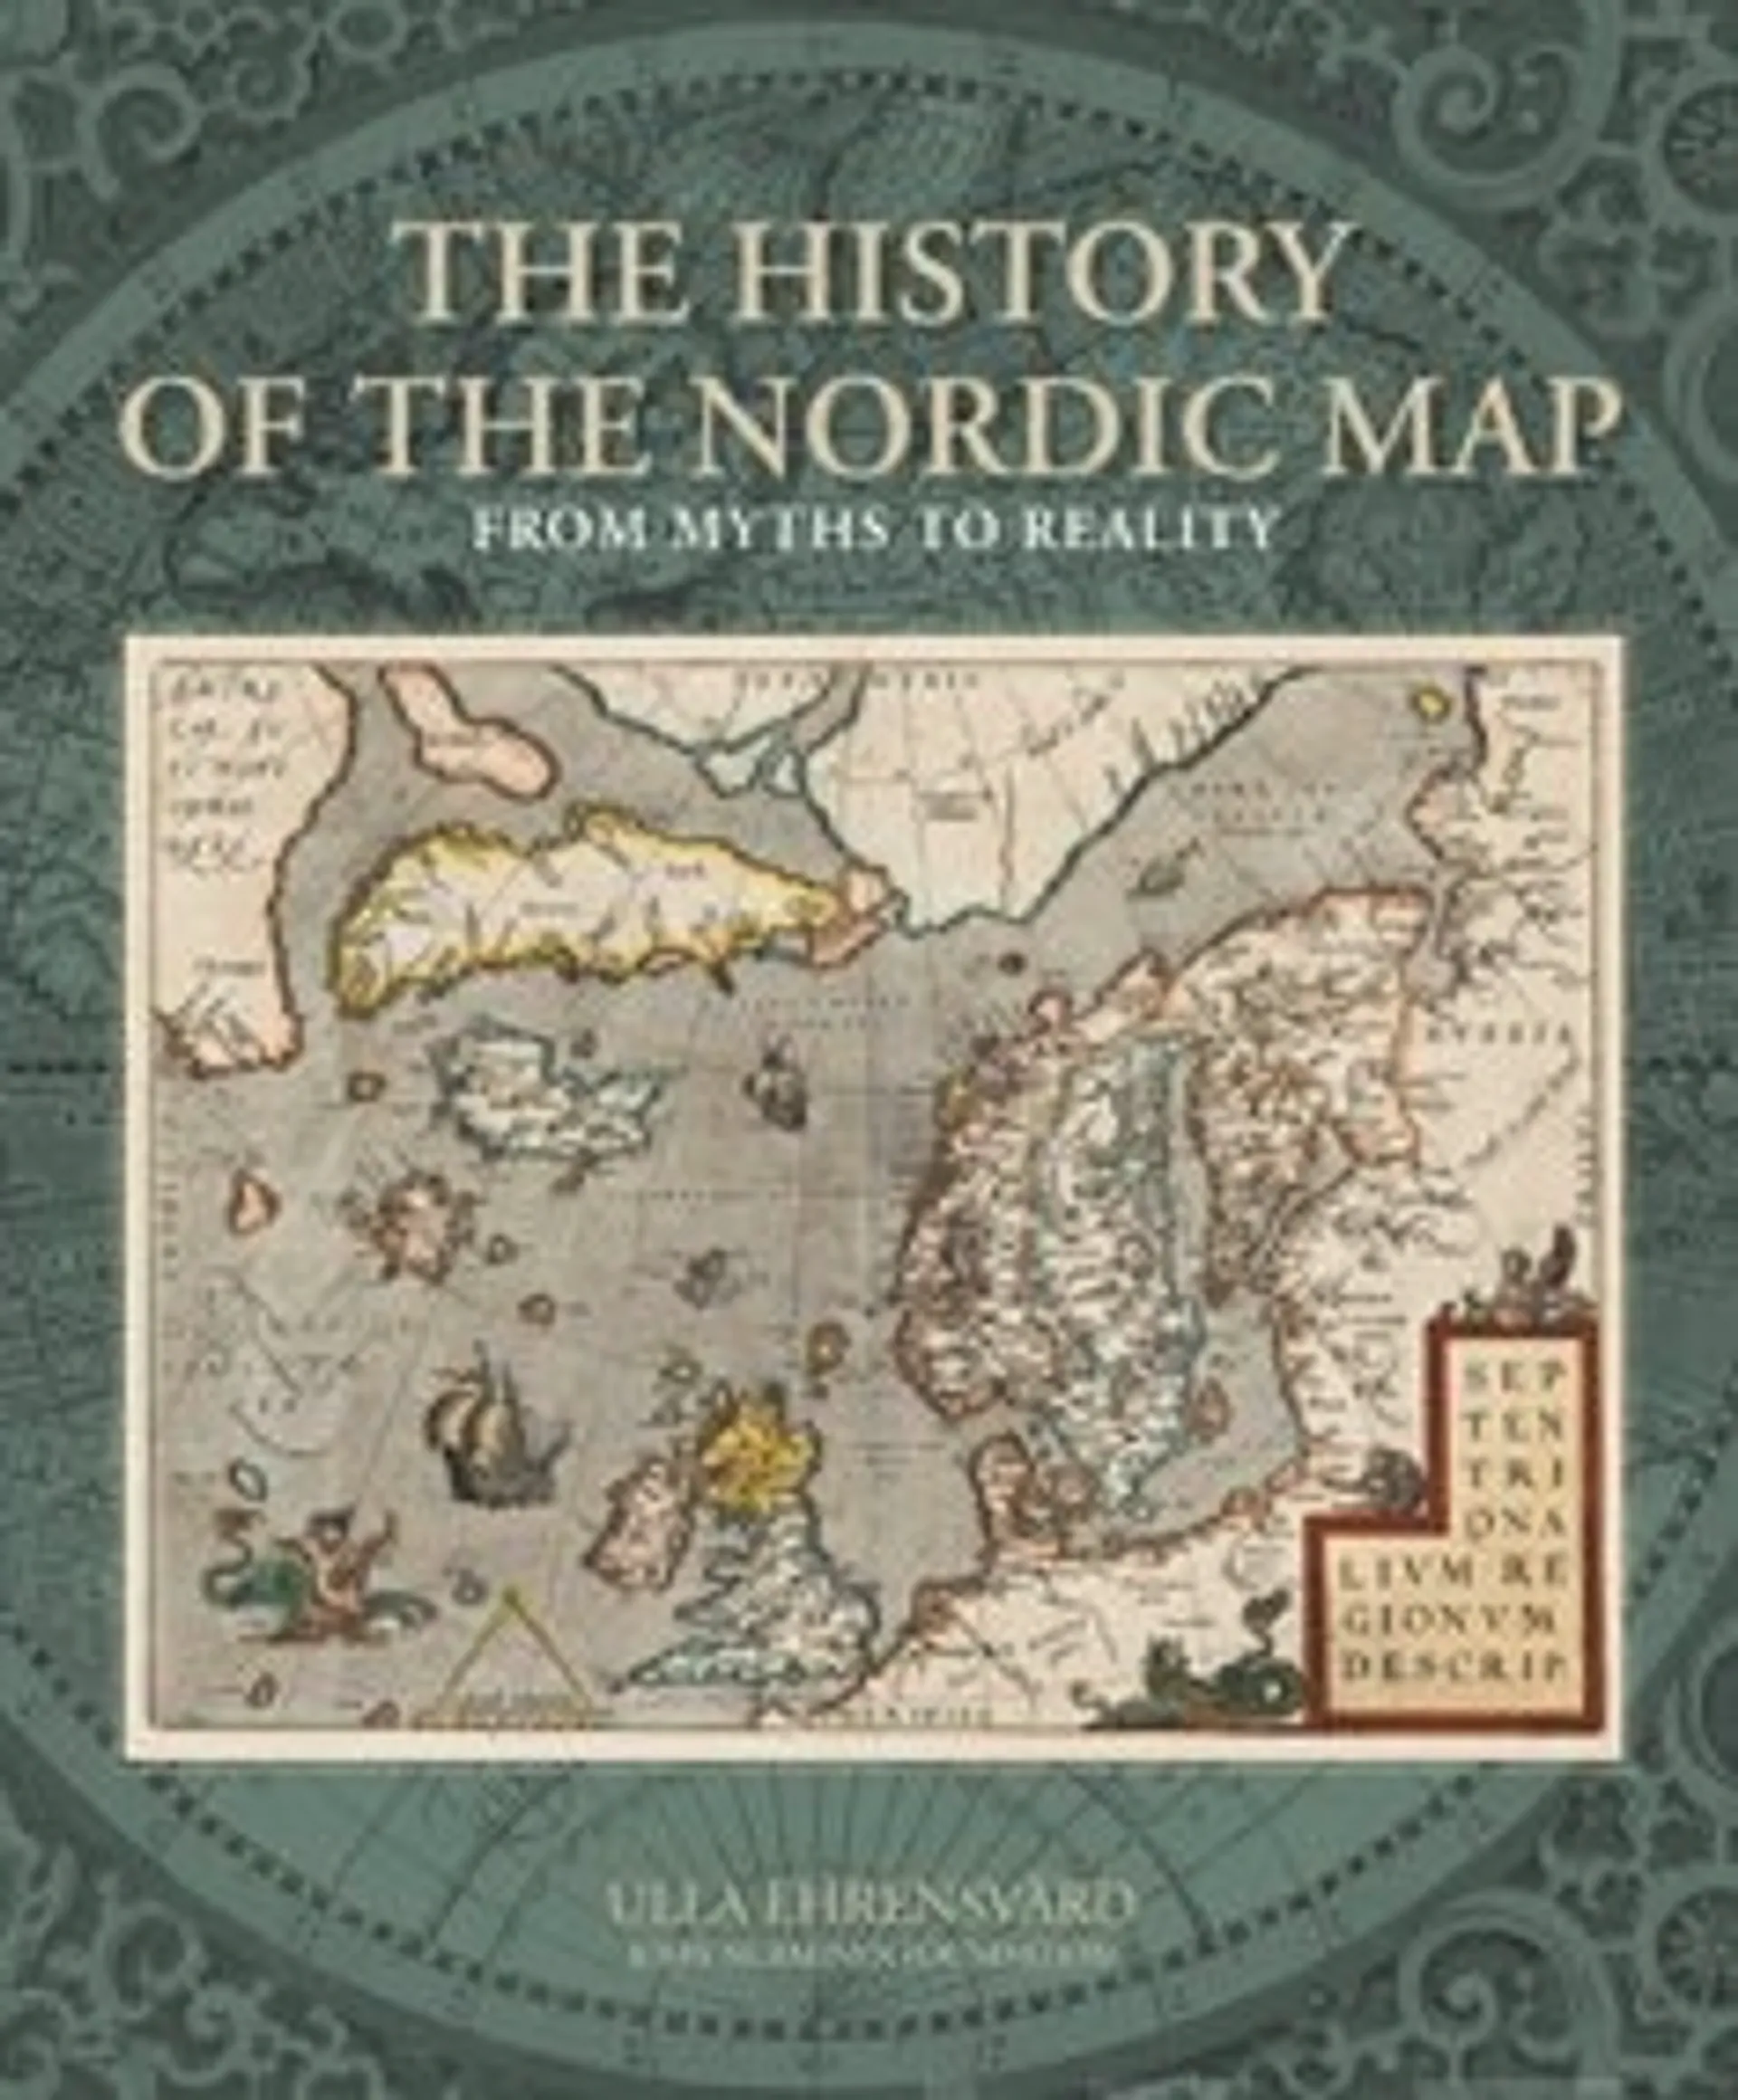 The history of the Nordic Map